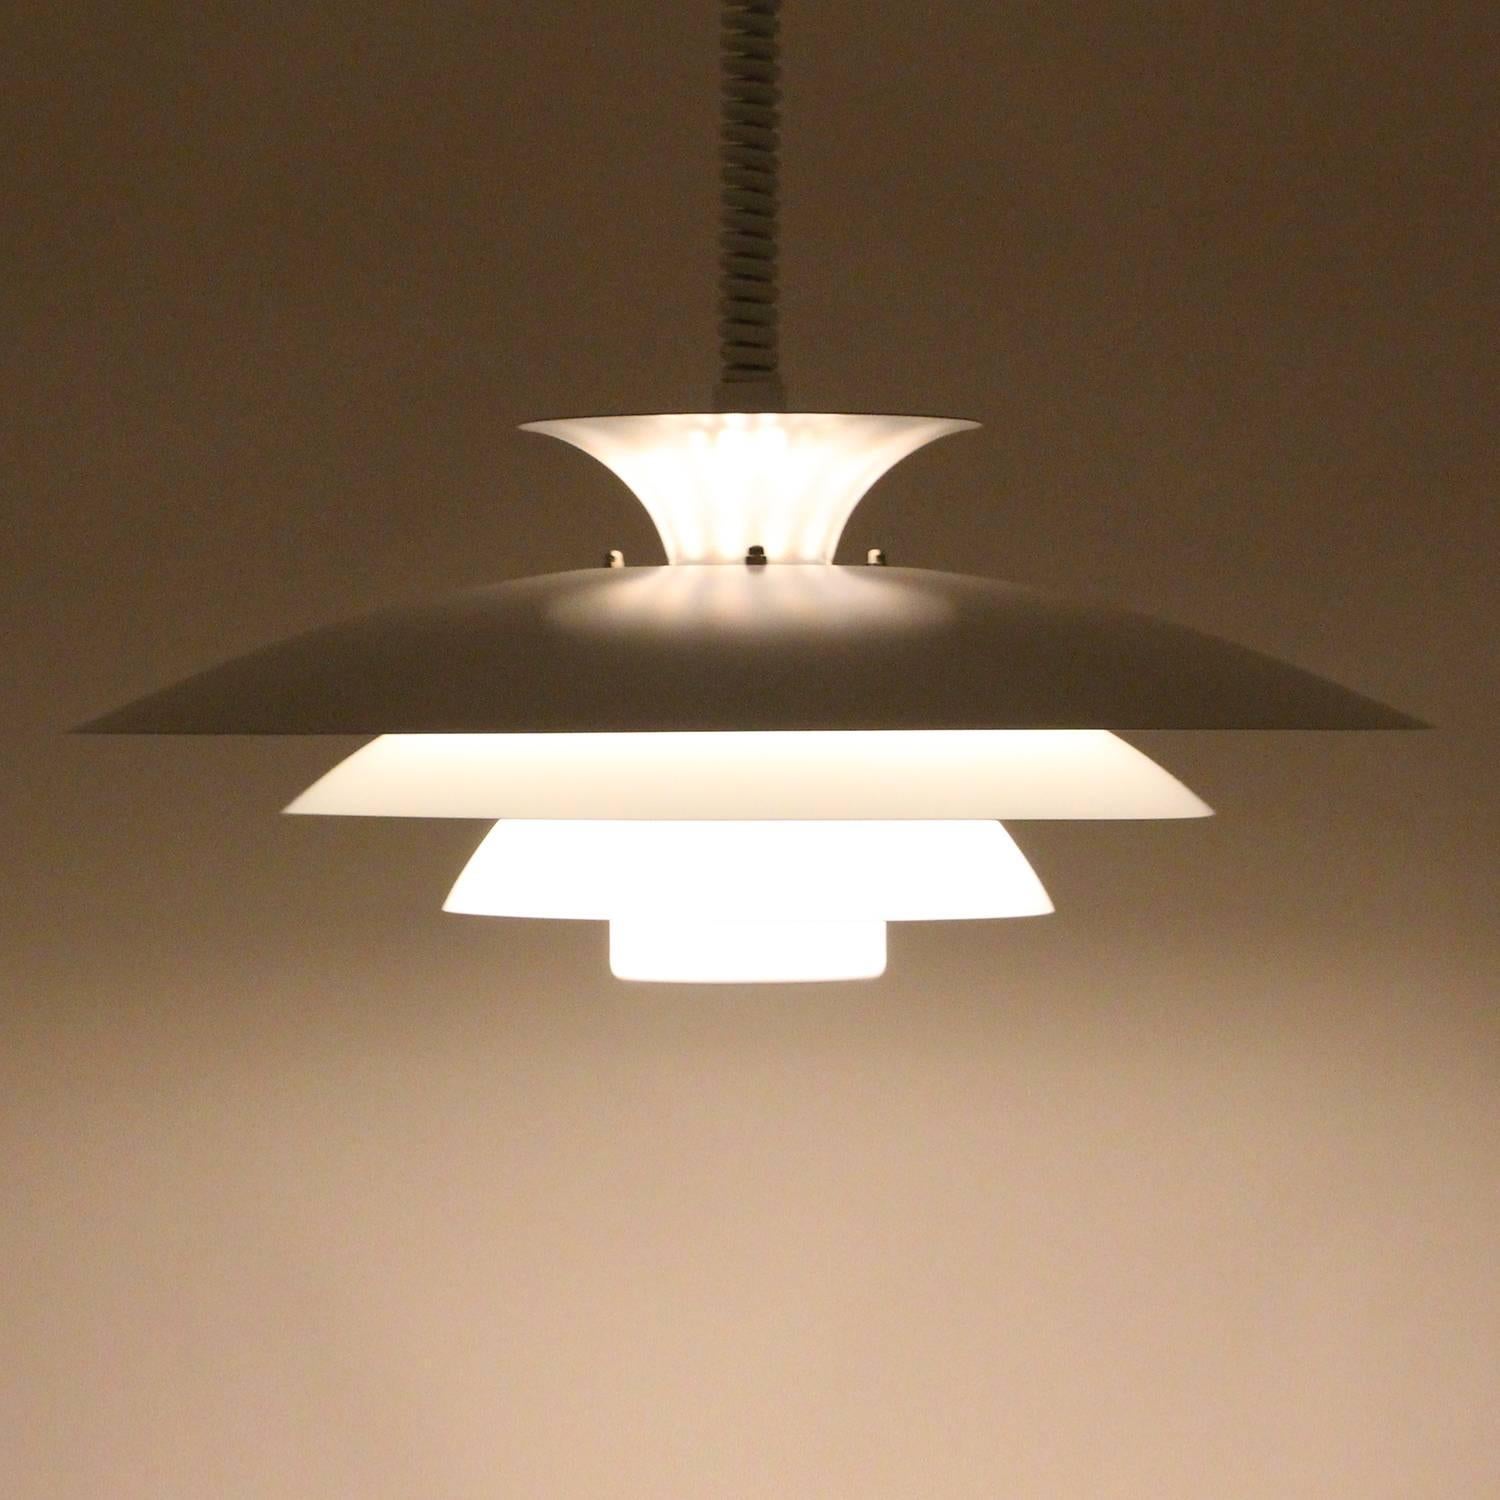 NO. 52511, white pendant light by Danish Form-light in the 1970s - beautiful large ceiling lamp with rise and fall suspension, in excellent vintage condition.

A stylish hanging lamp, built in a supreme quality (the trademark of Form-light's